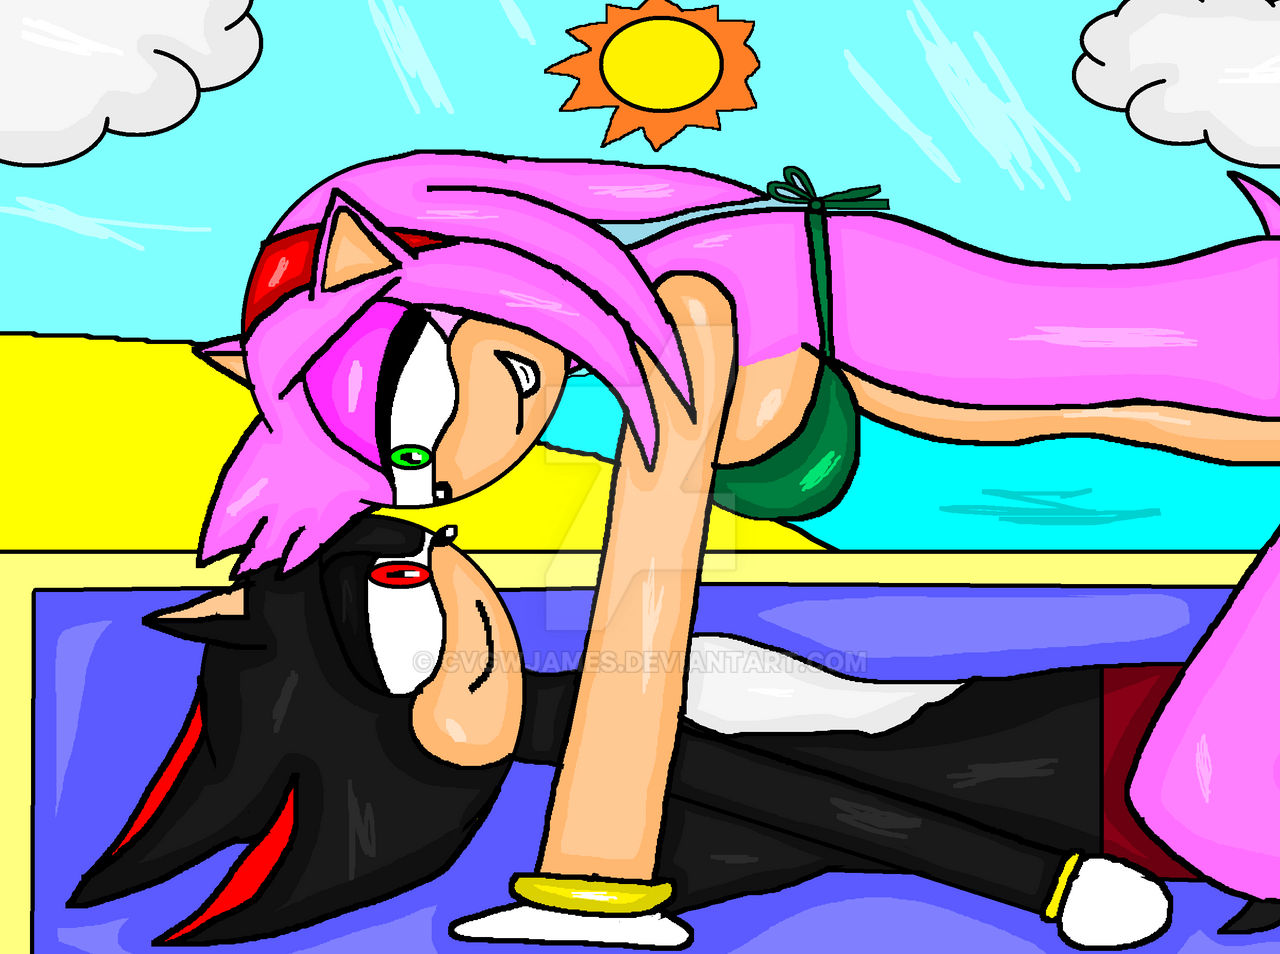 When Shadow finds out that Amy is cheating on him at the beach be